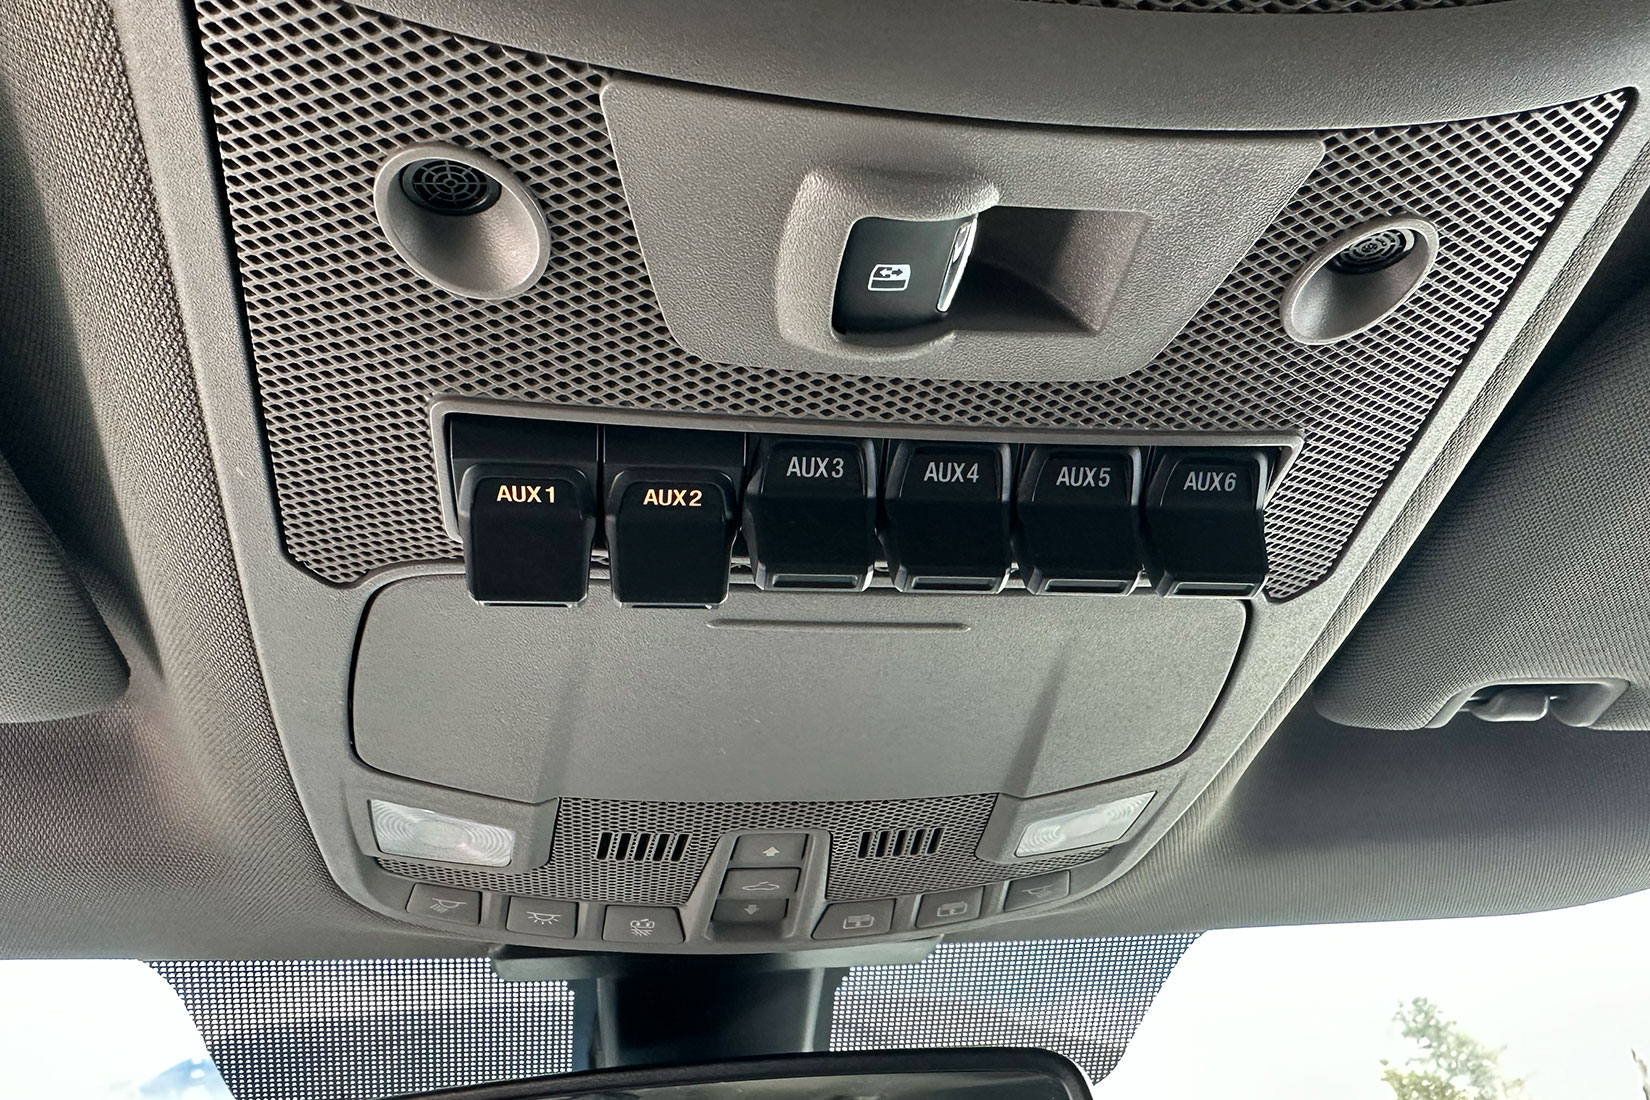 Auxiliary switches in a Ford overhead console